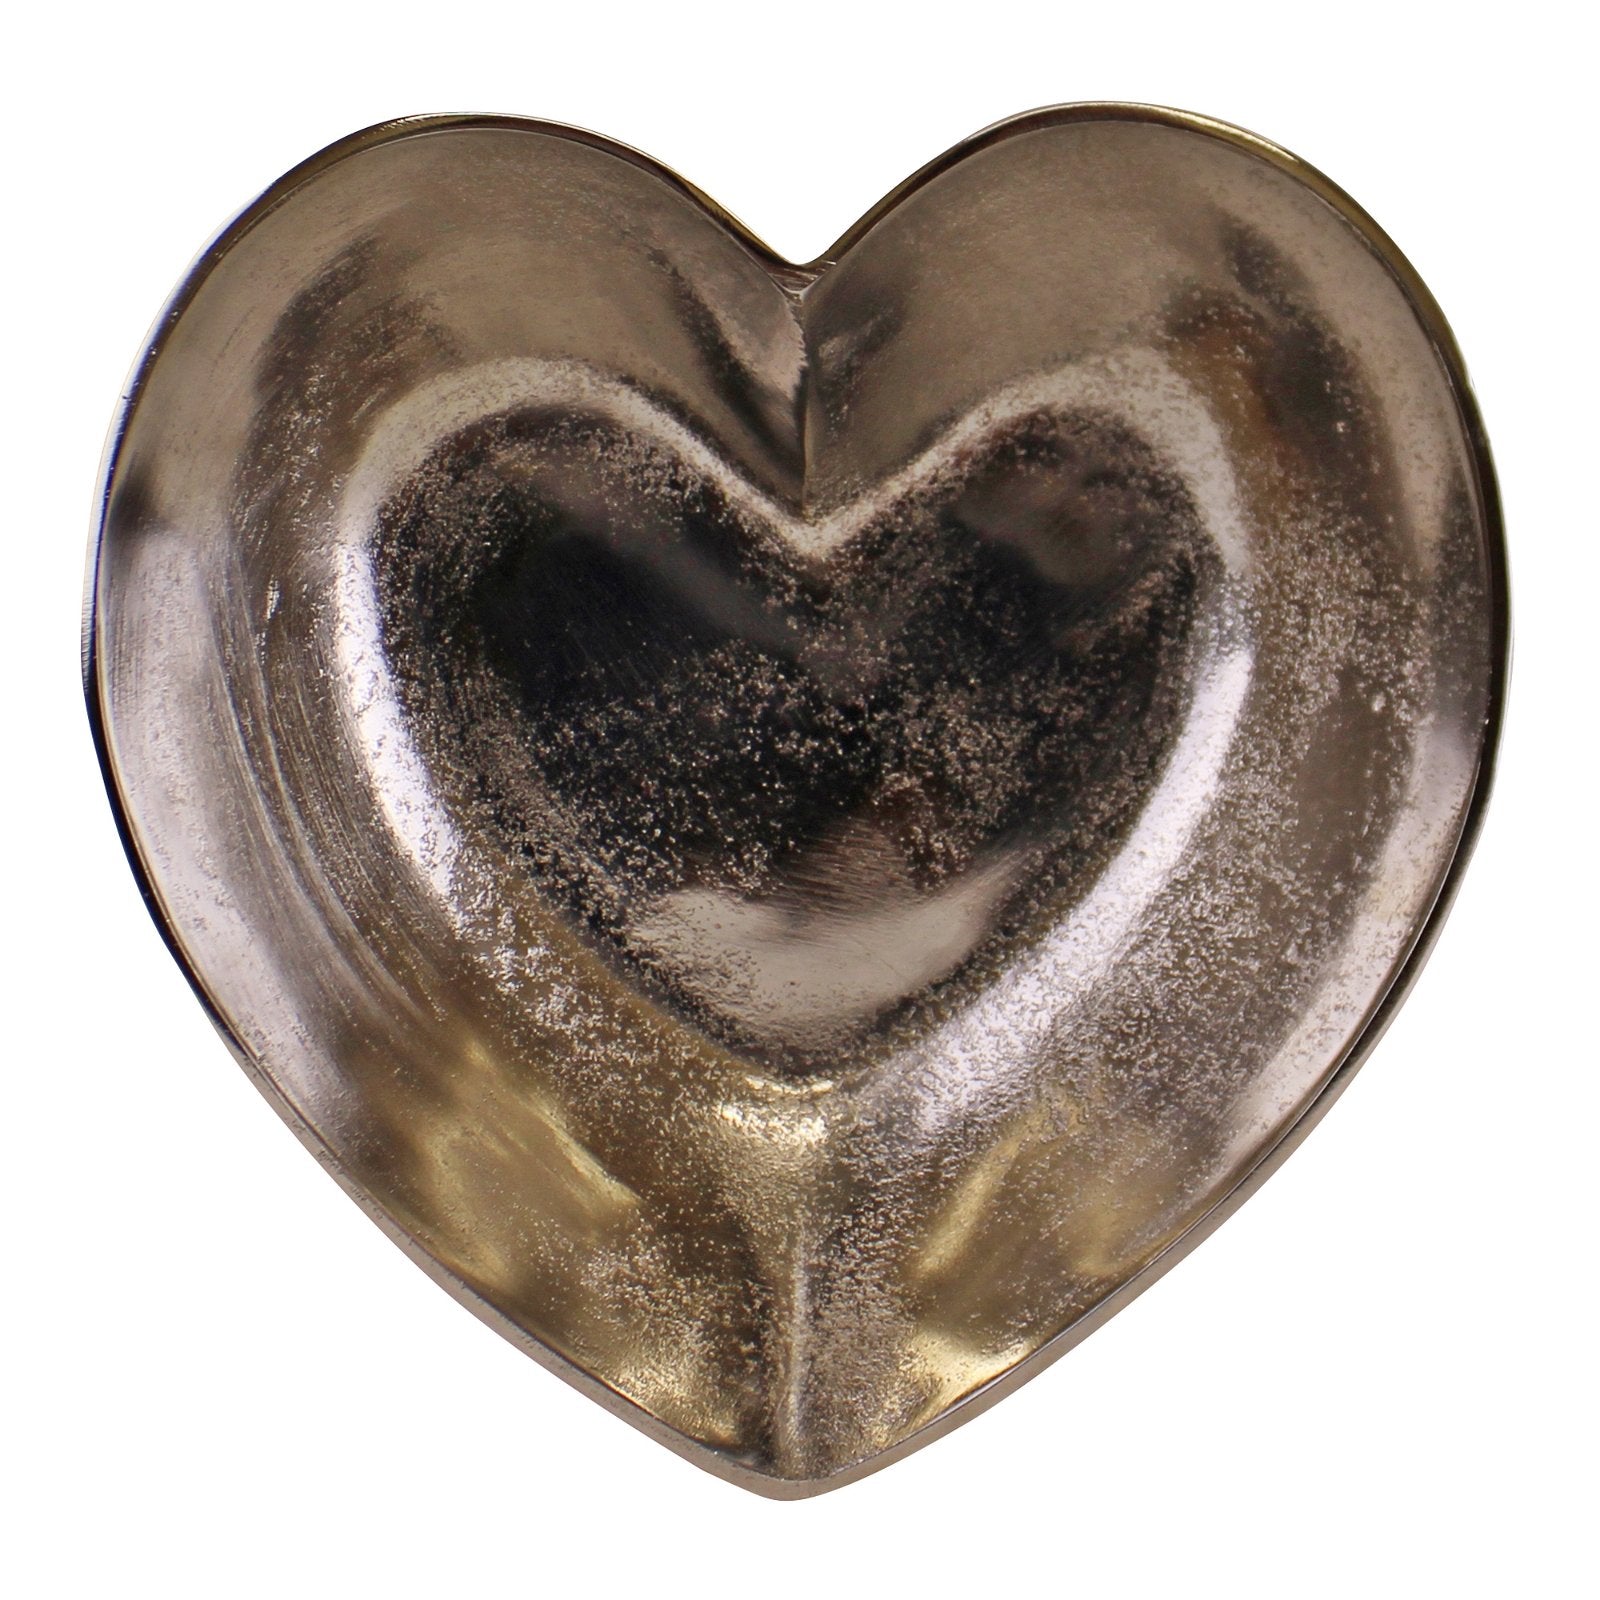 Silver Metal Heart Shaped Decorative Bowl Willow and Wine